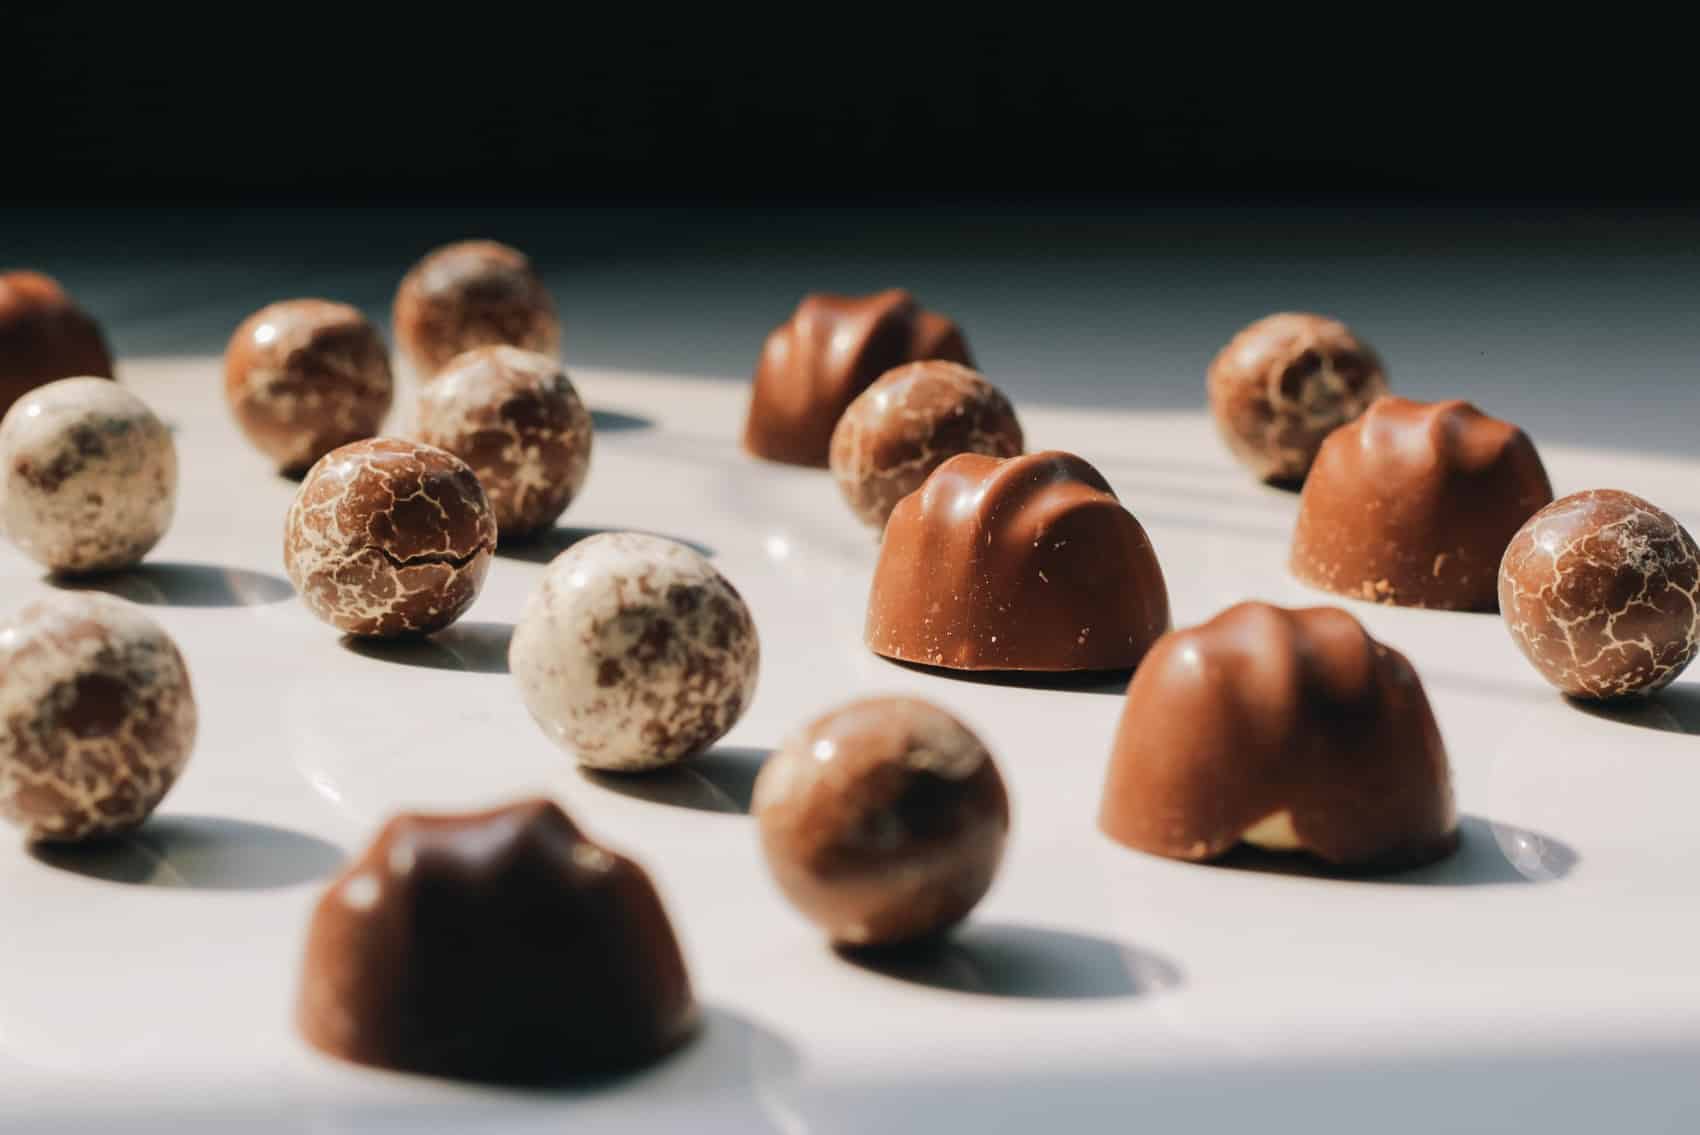 Close up of chocolate bites for tasting